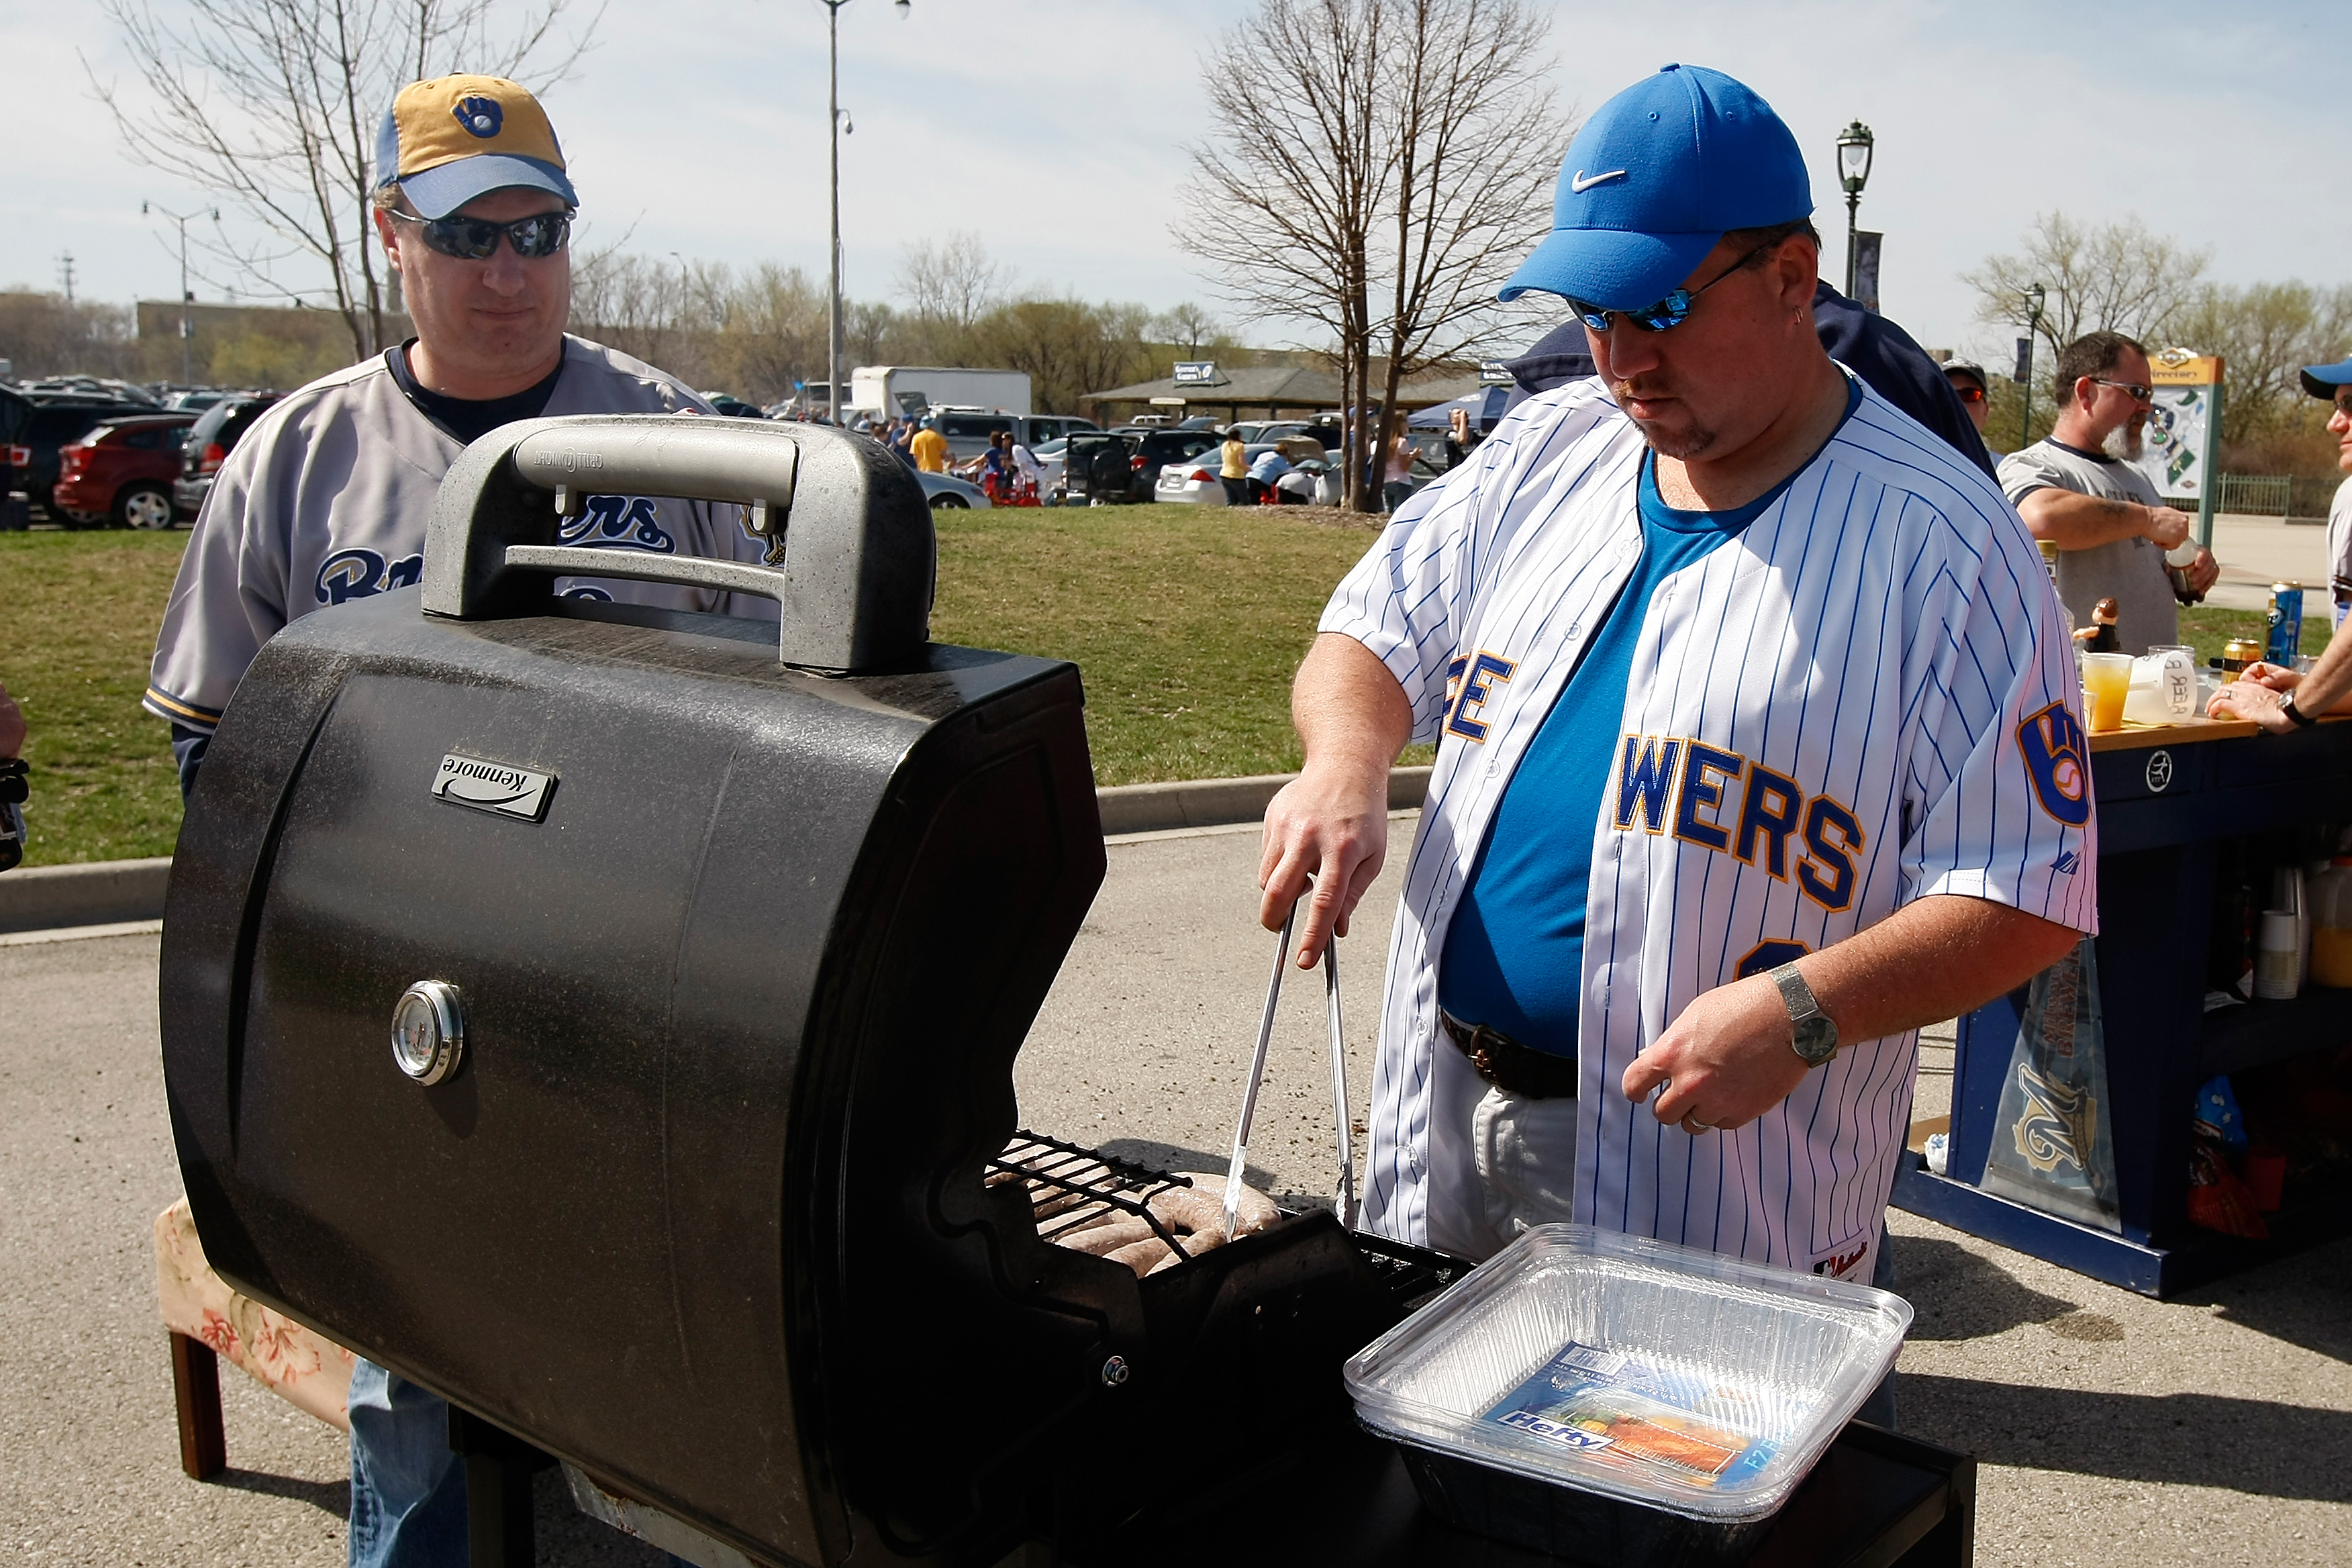 MILWAUKEE, WI - APRIL 05: Brewers fans tailgate in the parking lot prior to the game between the Colorado Rockies and the Milwaukee Brewers at Miller Park on April 5, 2010 in Milwaukee, Wisconsin. (Photo by Scott Boehm/Getty Images)